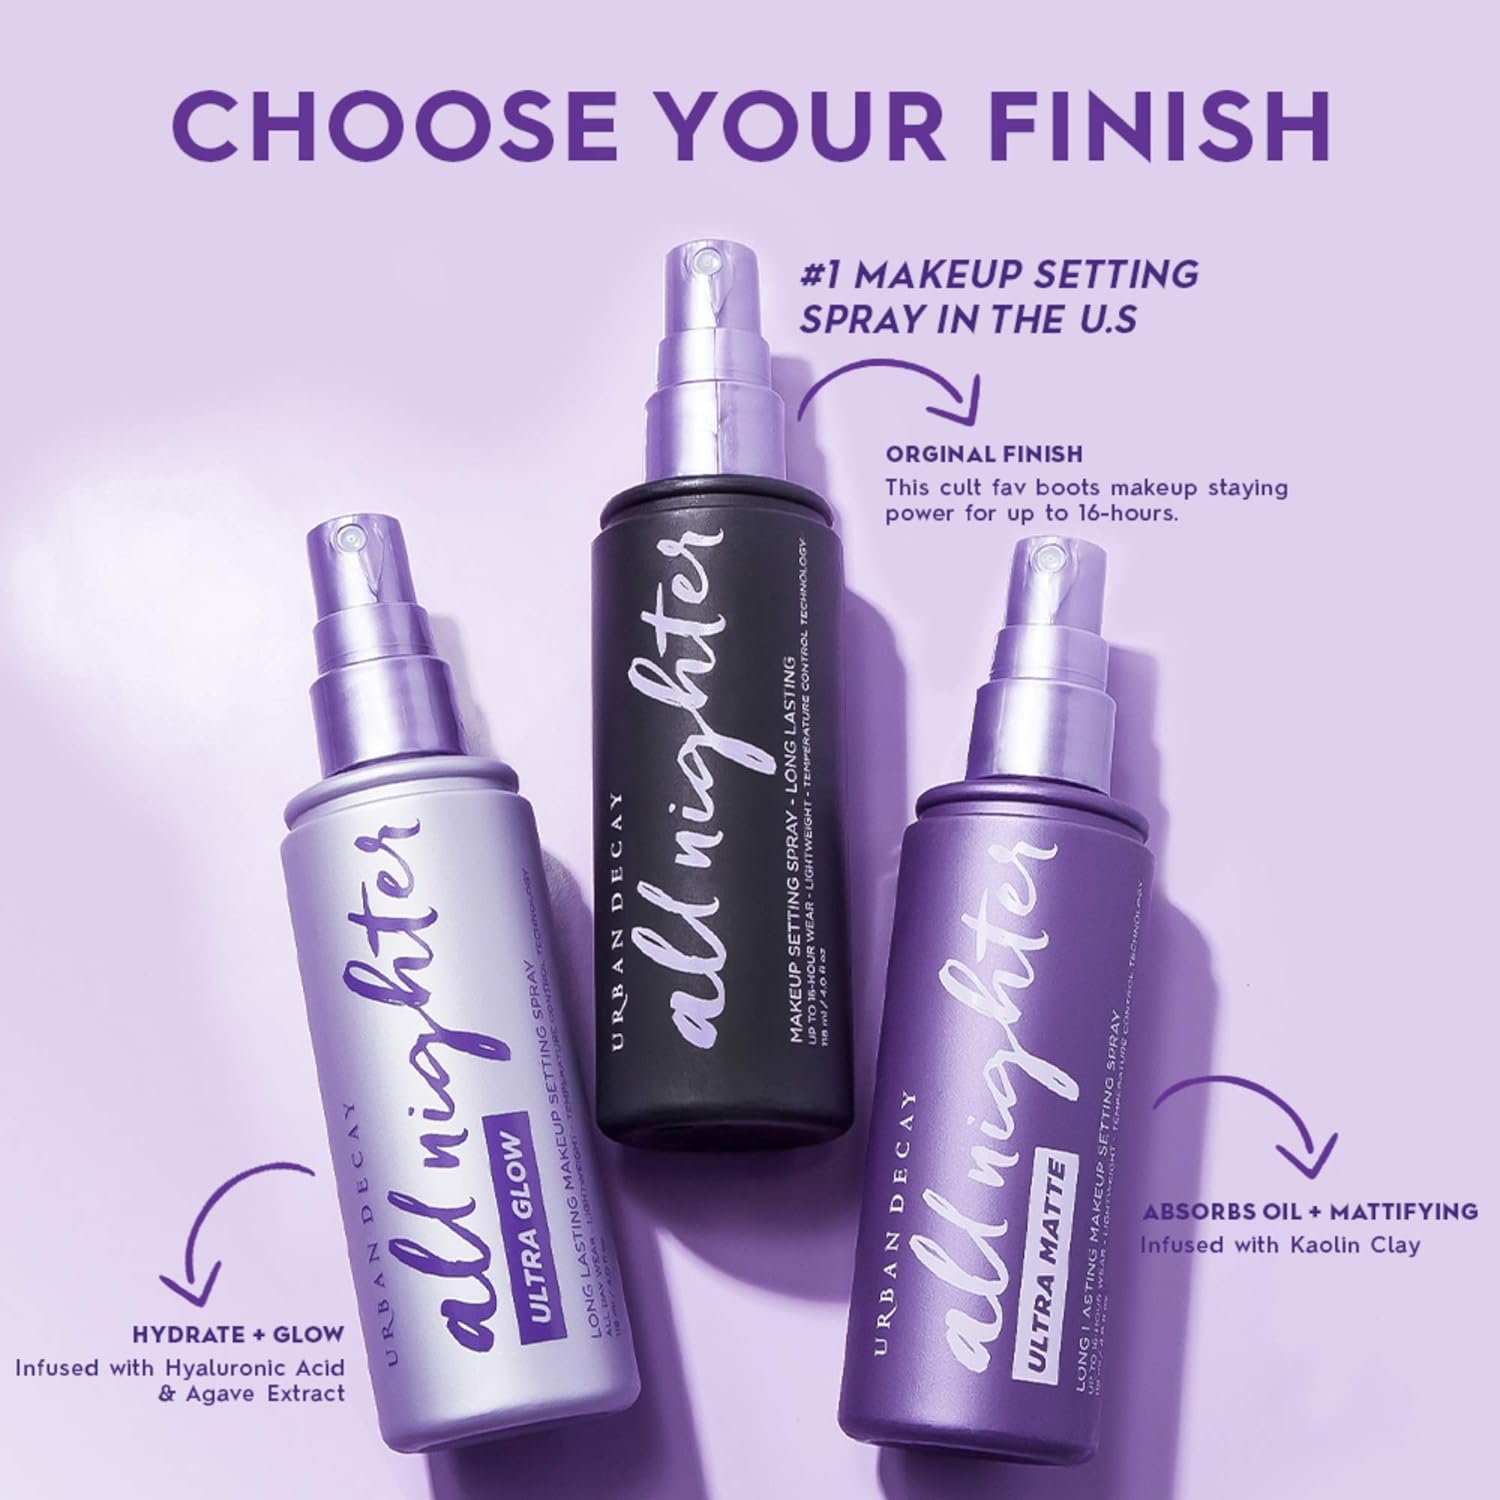  Urban Decay All Nighter Long-Lasting Makeup Setting Spray - Award-Winning Makeup Finishing Spray - Lasts Up To 16 Hours - Oil-Free, Microfine Mist - Non-Drying Formula for All Skin